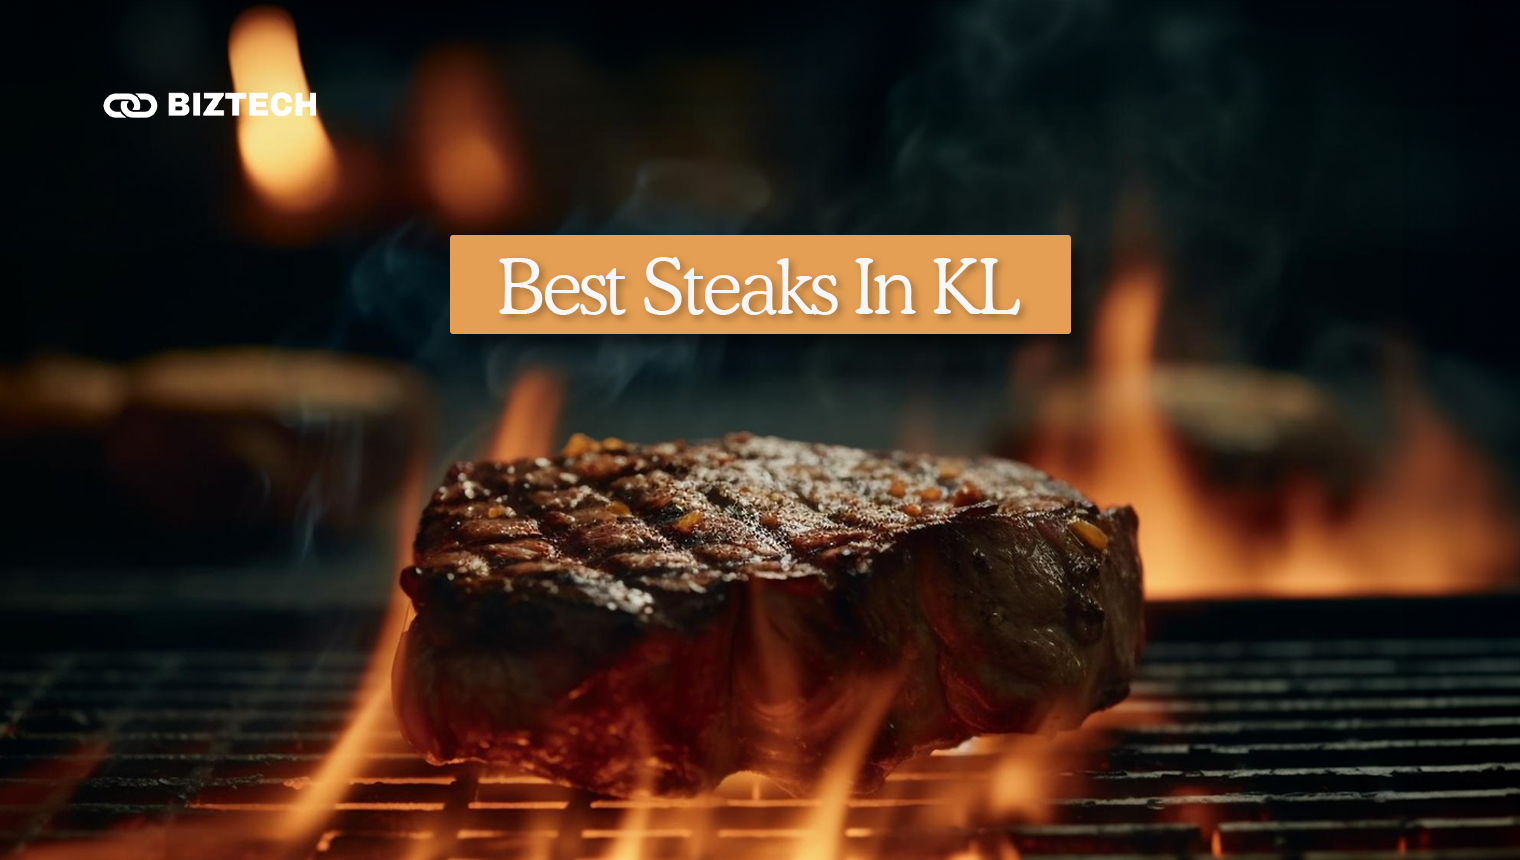 Enjoy The Best Steaks in KL With These Top 10 Restaurants